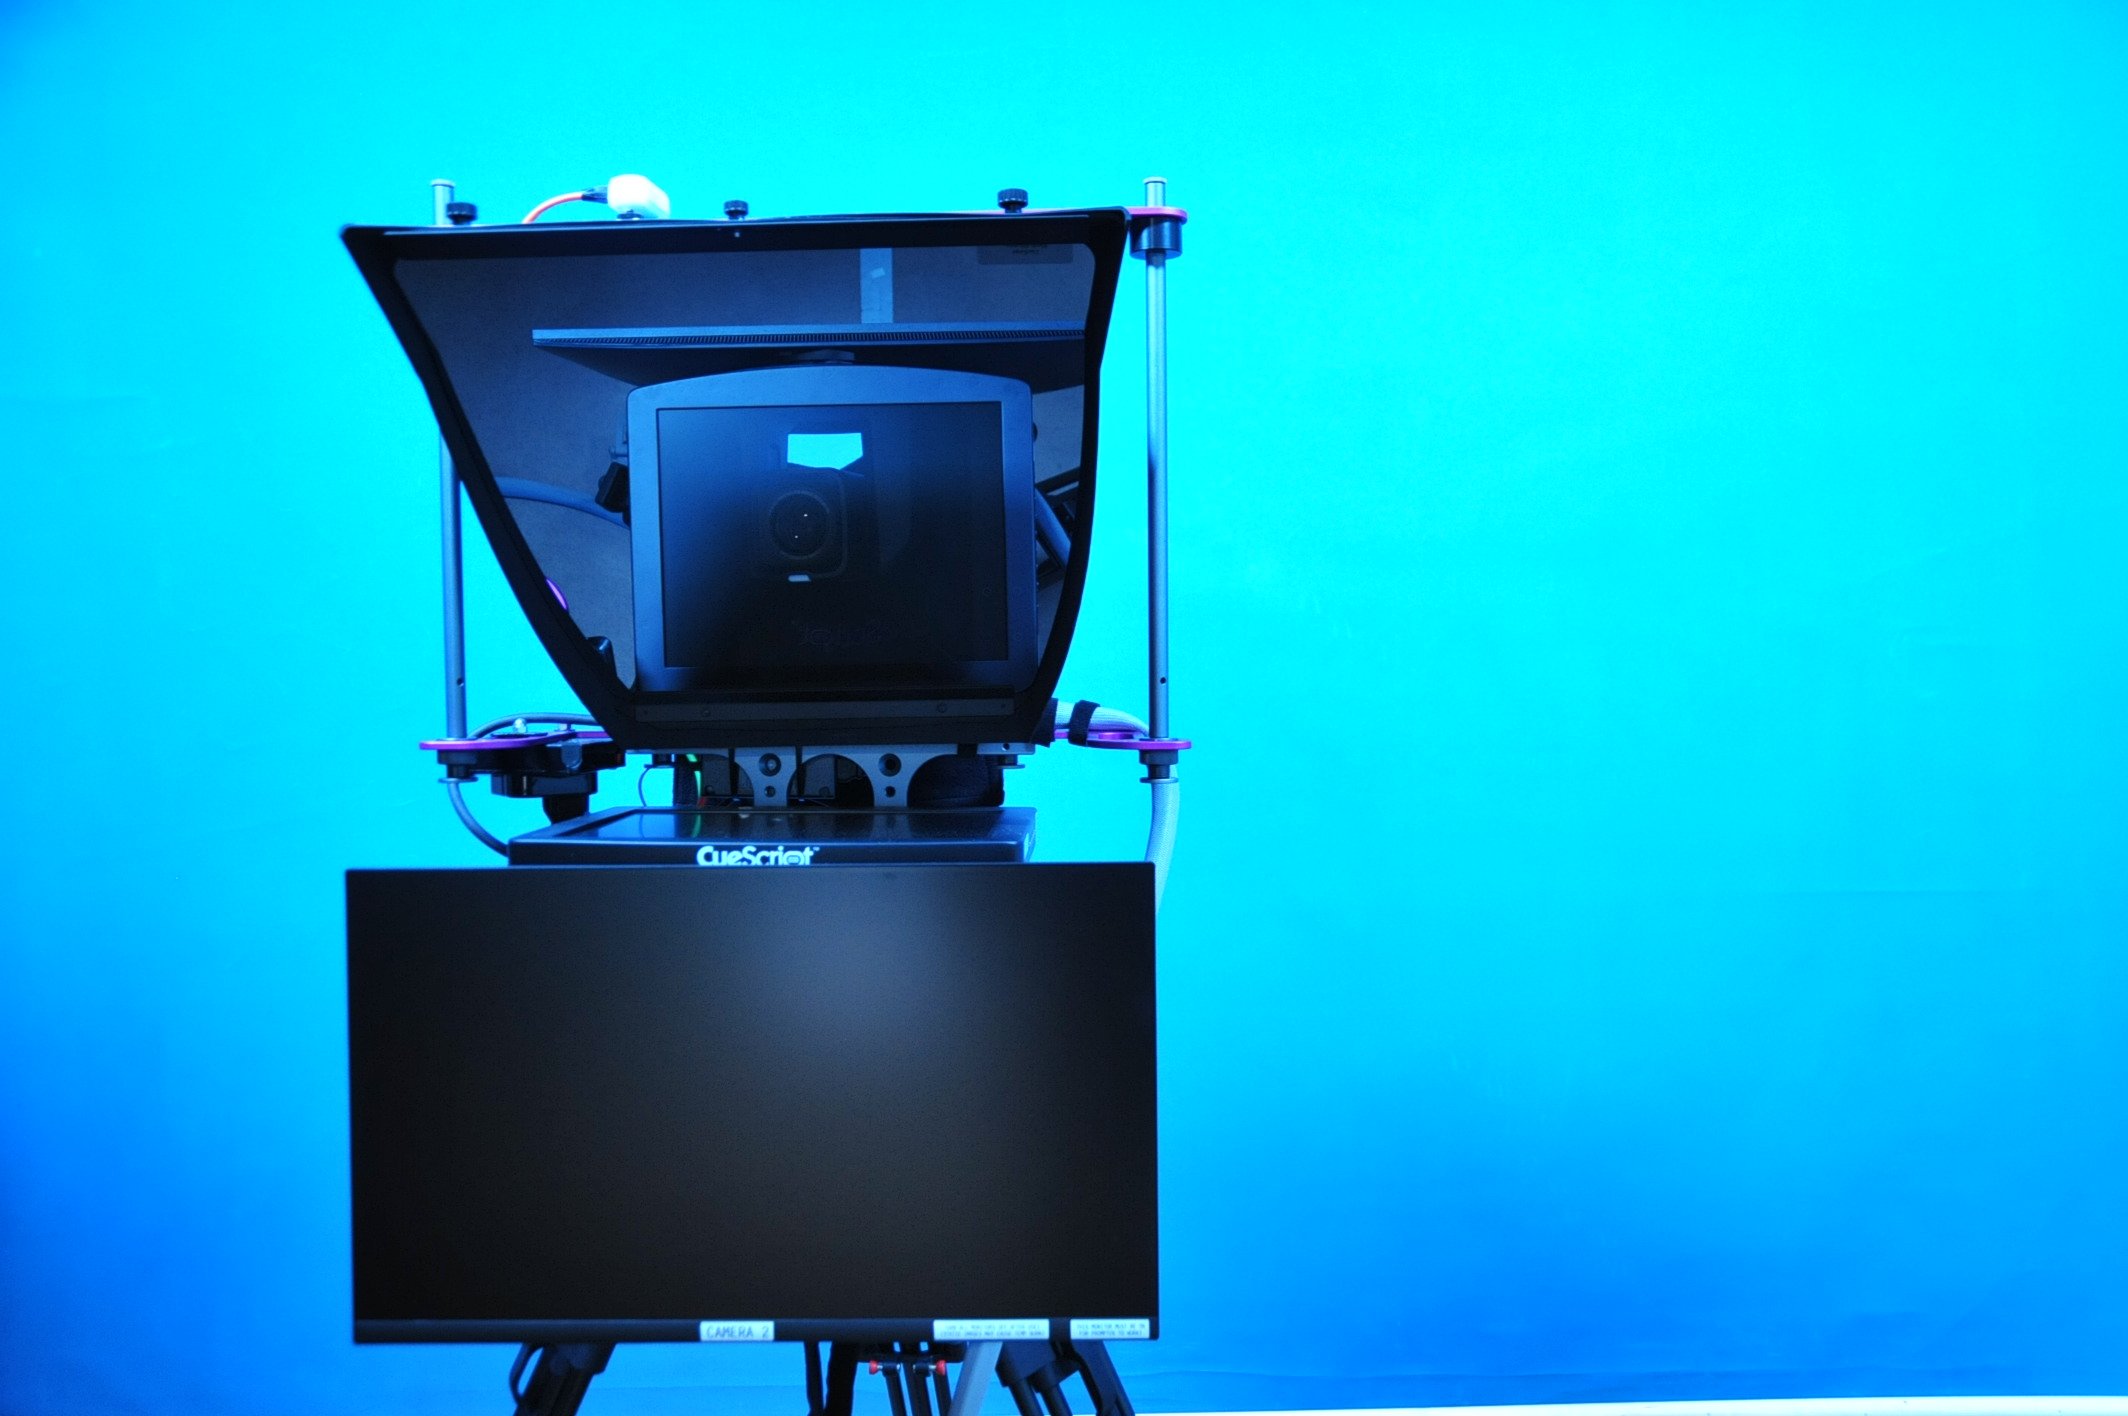 Roll-In Teleprompters are Key for Many Corporate Studios